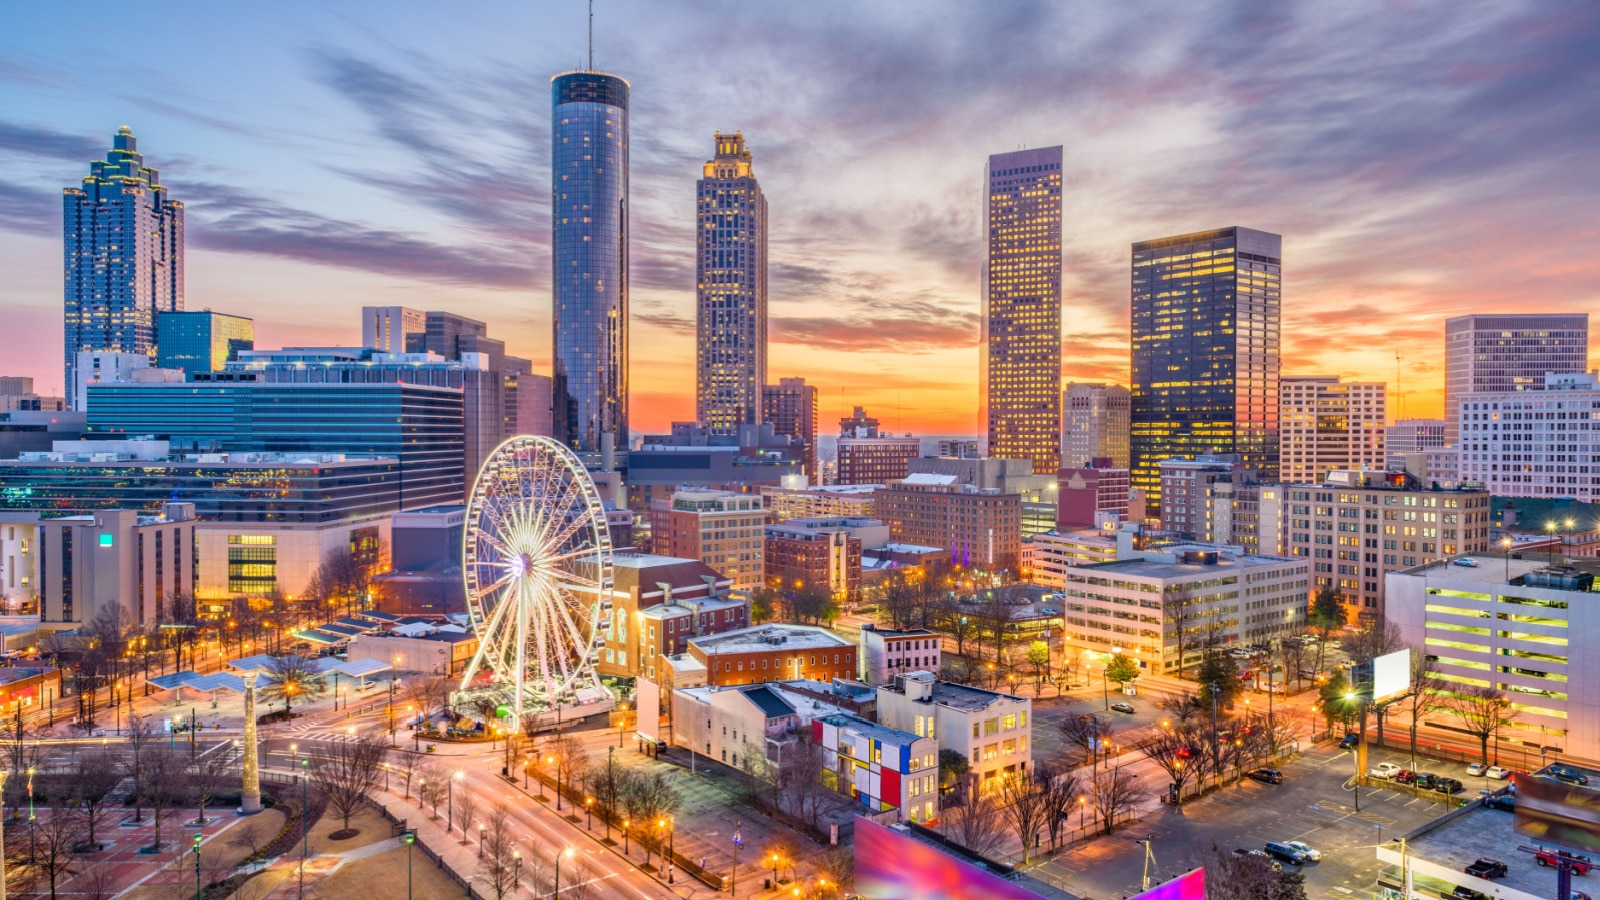 <p>Atlanta is the capital of Georgia. It is known for its busy airport and important role in the civil rights movement. But there have been worries about the city’s crowded streets and high crime rates. One person said, “Given its size, Atlanta is surprisingly boring.”</p>